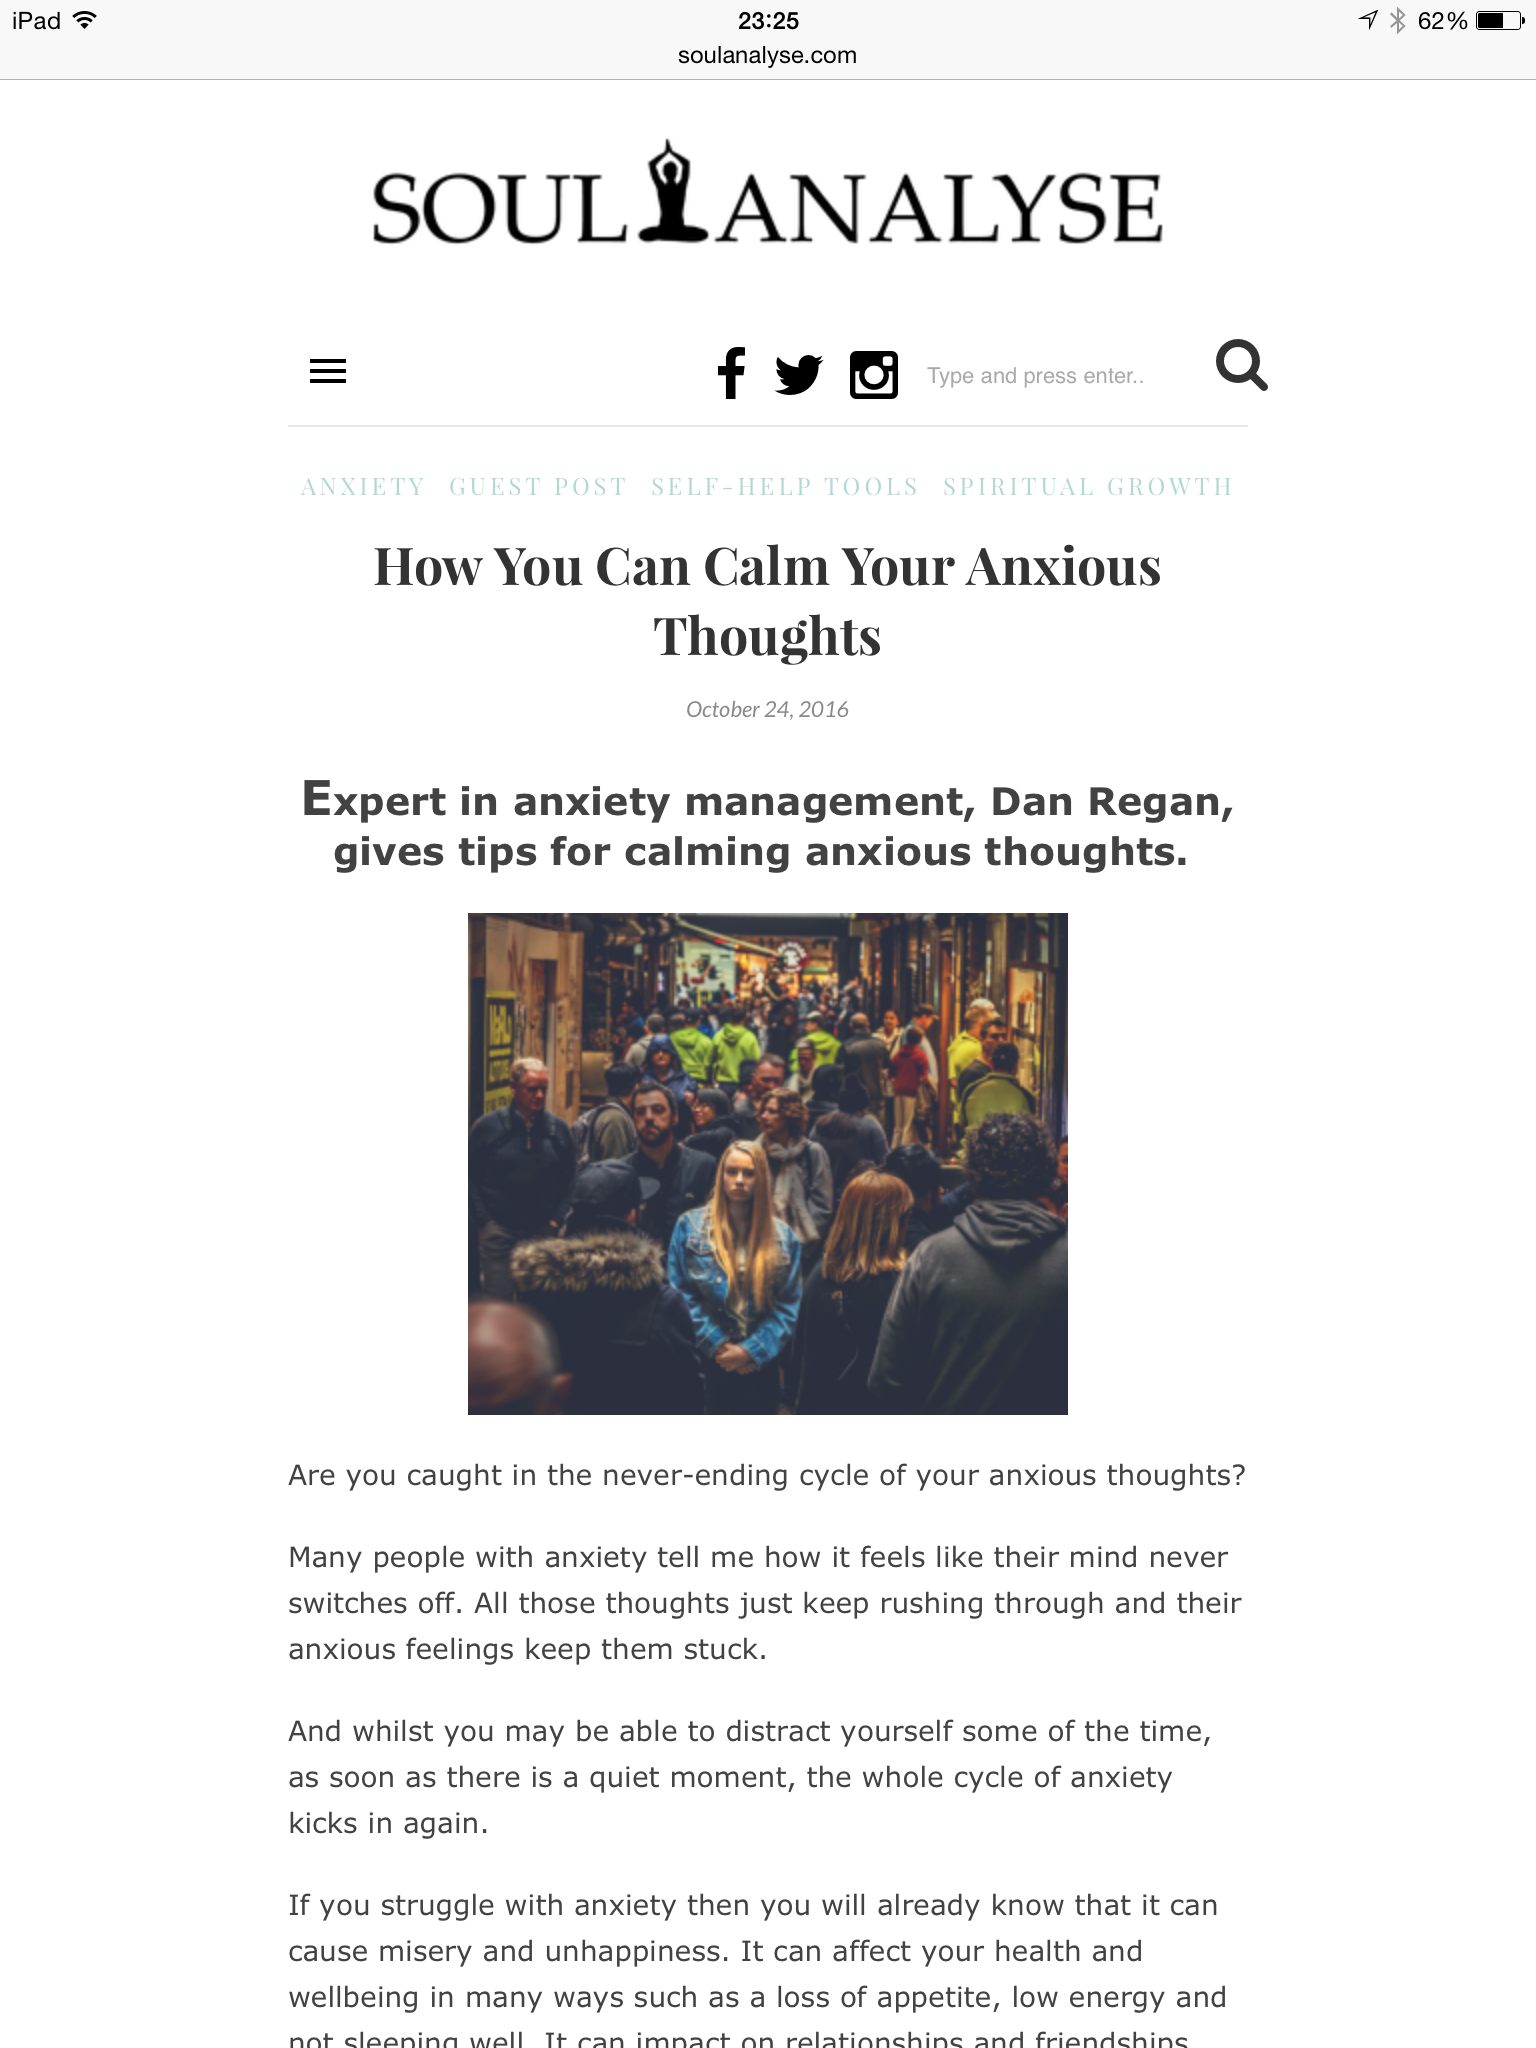 how to calm anxious thoughts soul analyse